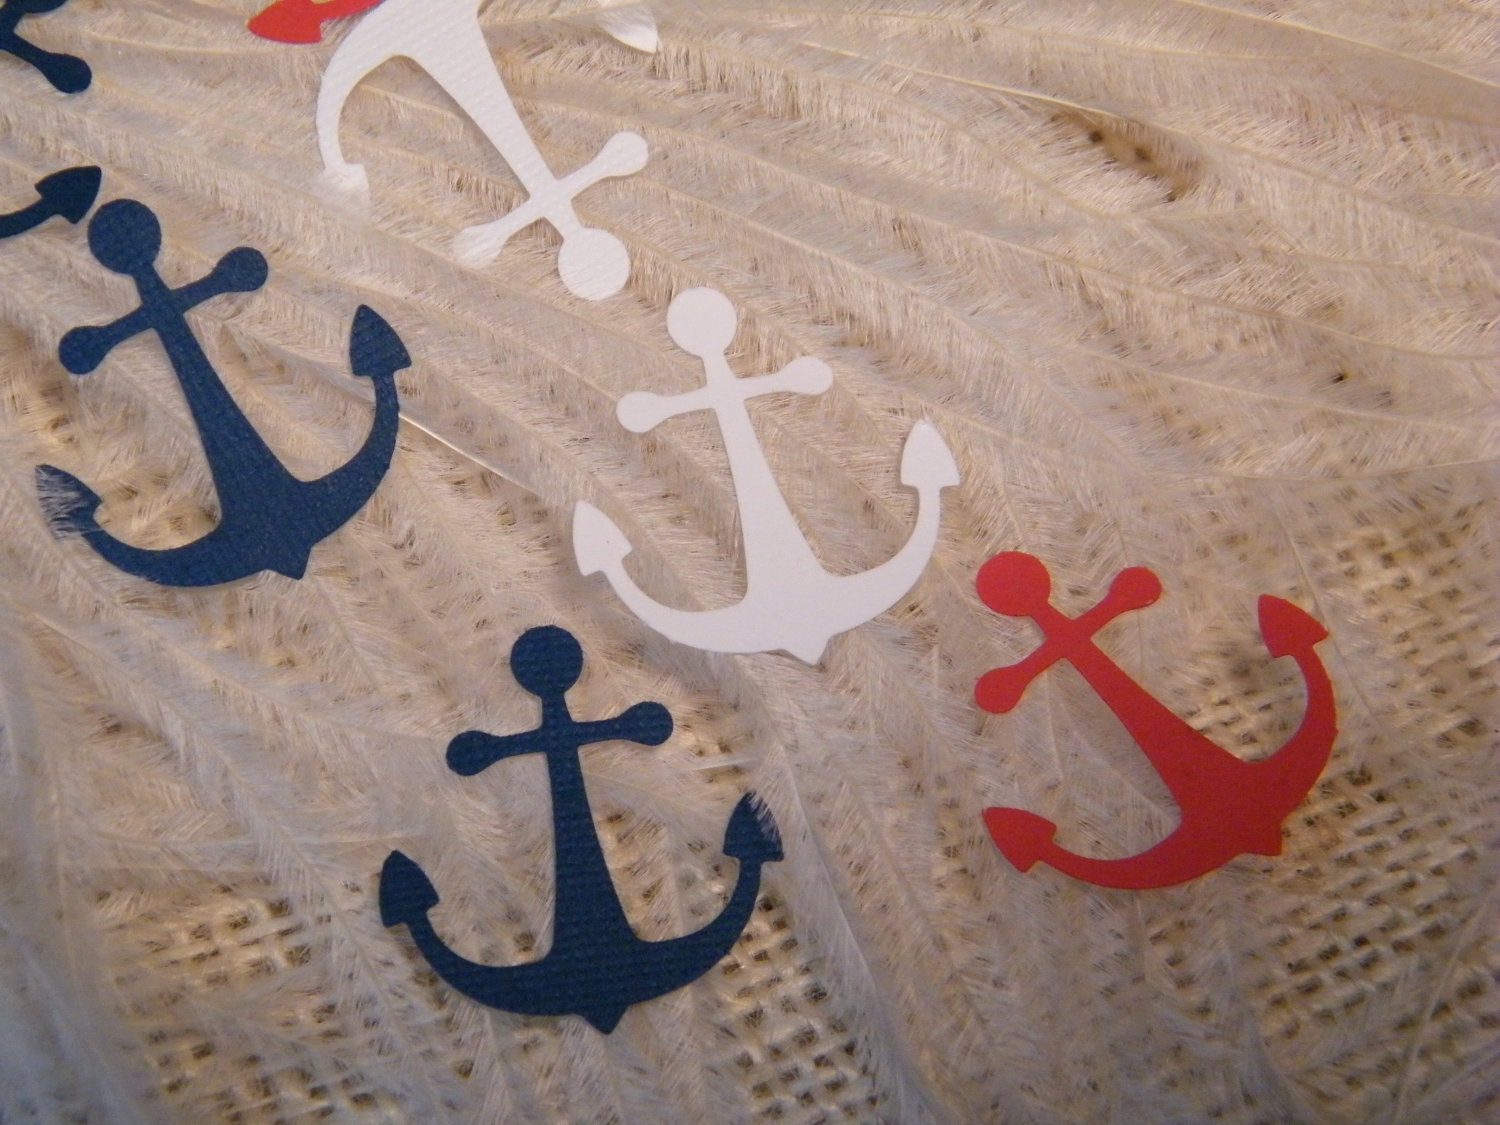 Party Decoration - Lot of 200 Anchor Confetti - Red -White- Blue / Navy - 4th of July - Patriotic - Boys Birthday Party - Nautical Confetti